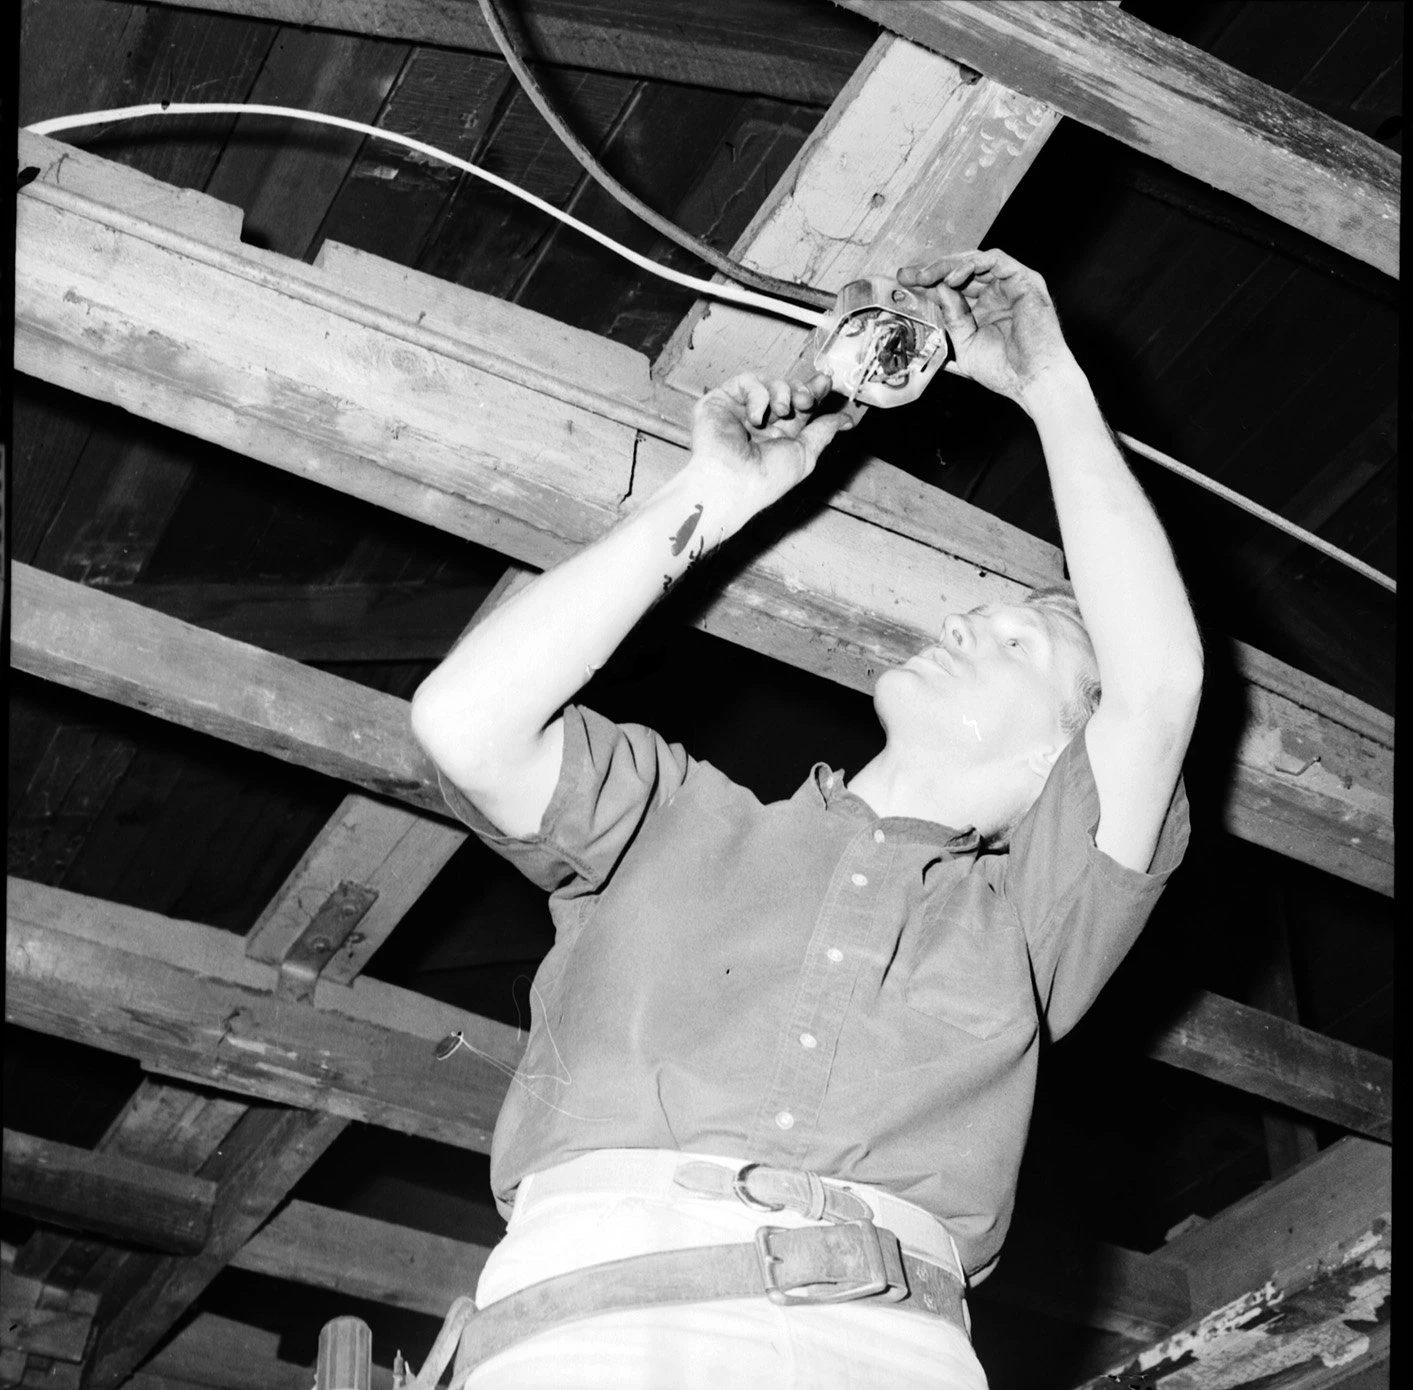 Black and white photograph of a man doing electrical work on a the ceiling rafters of a home.